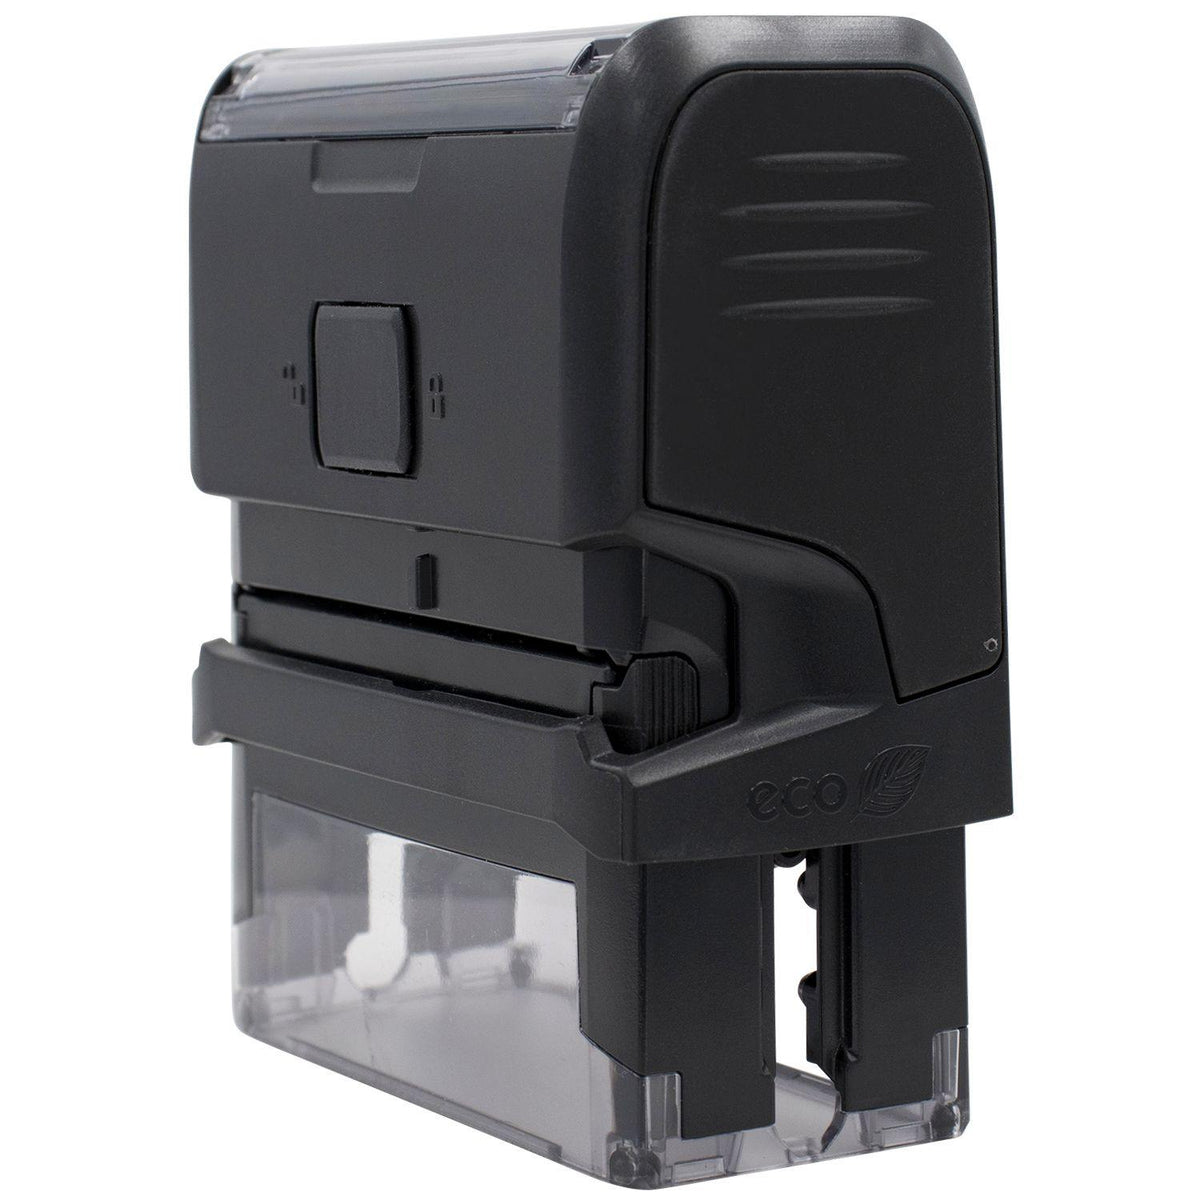 Self-Inking Bold Copy Stamp - Engineer Seal Stamps - Brand_Trodat, Impression Size_Small, Stamp Type_Self-Inking Stamp, Type of Use_General, Type of Use_Office